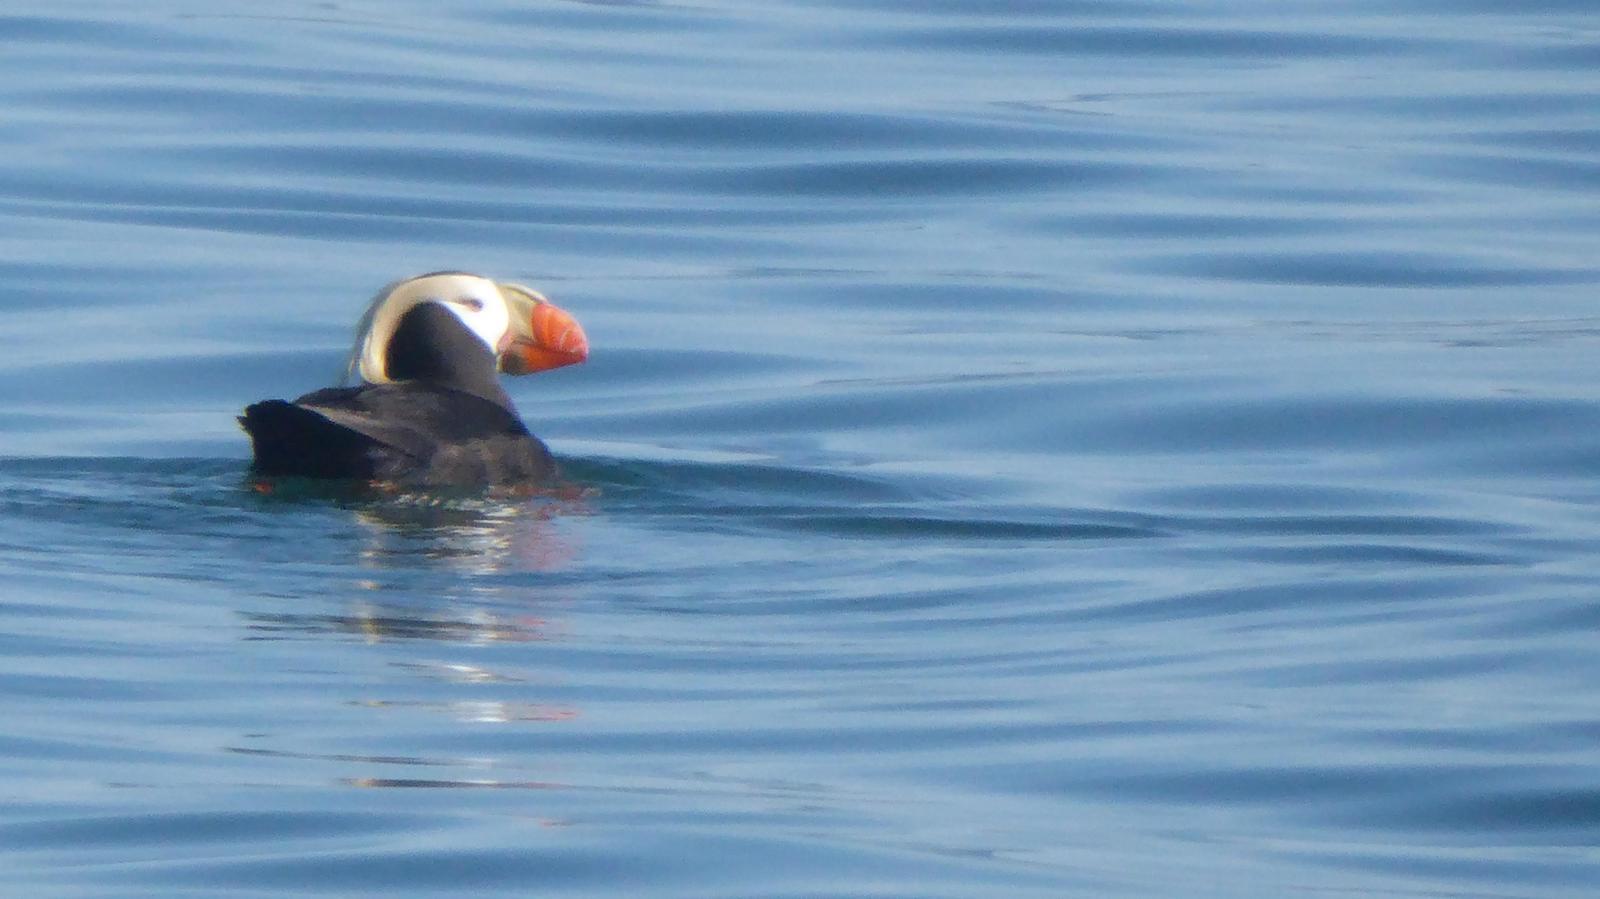 Tufted Puffin Photo by Daliel Leite